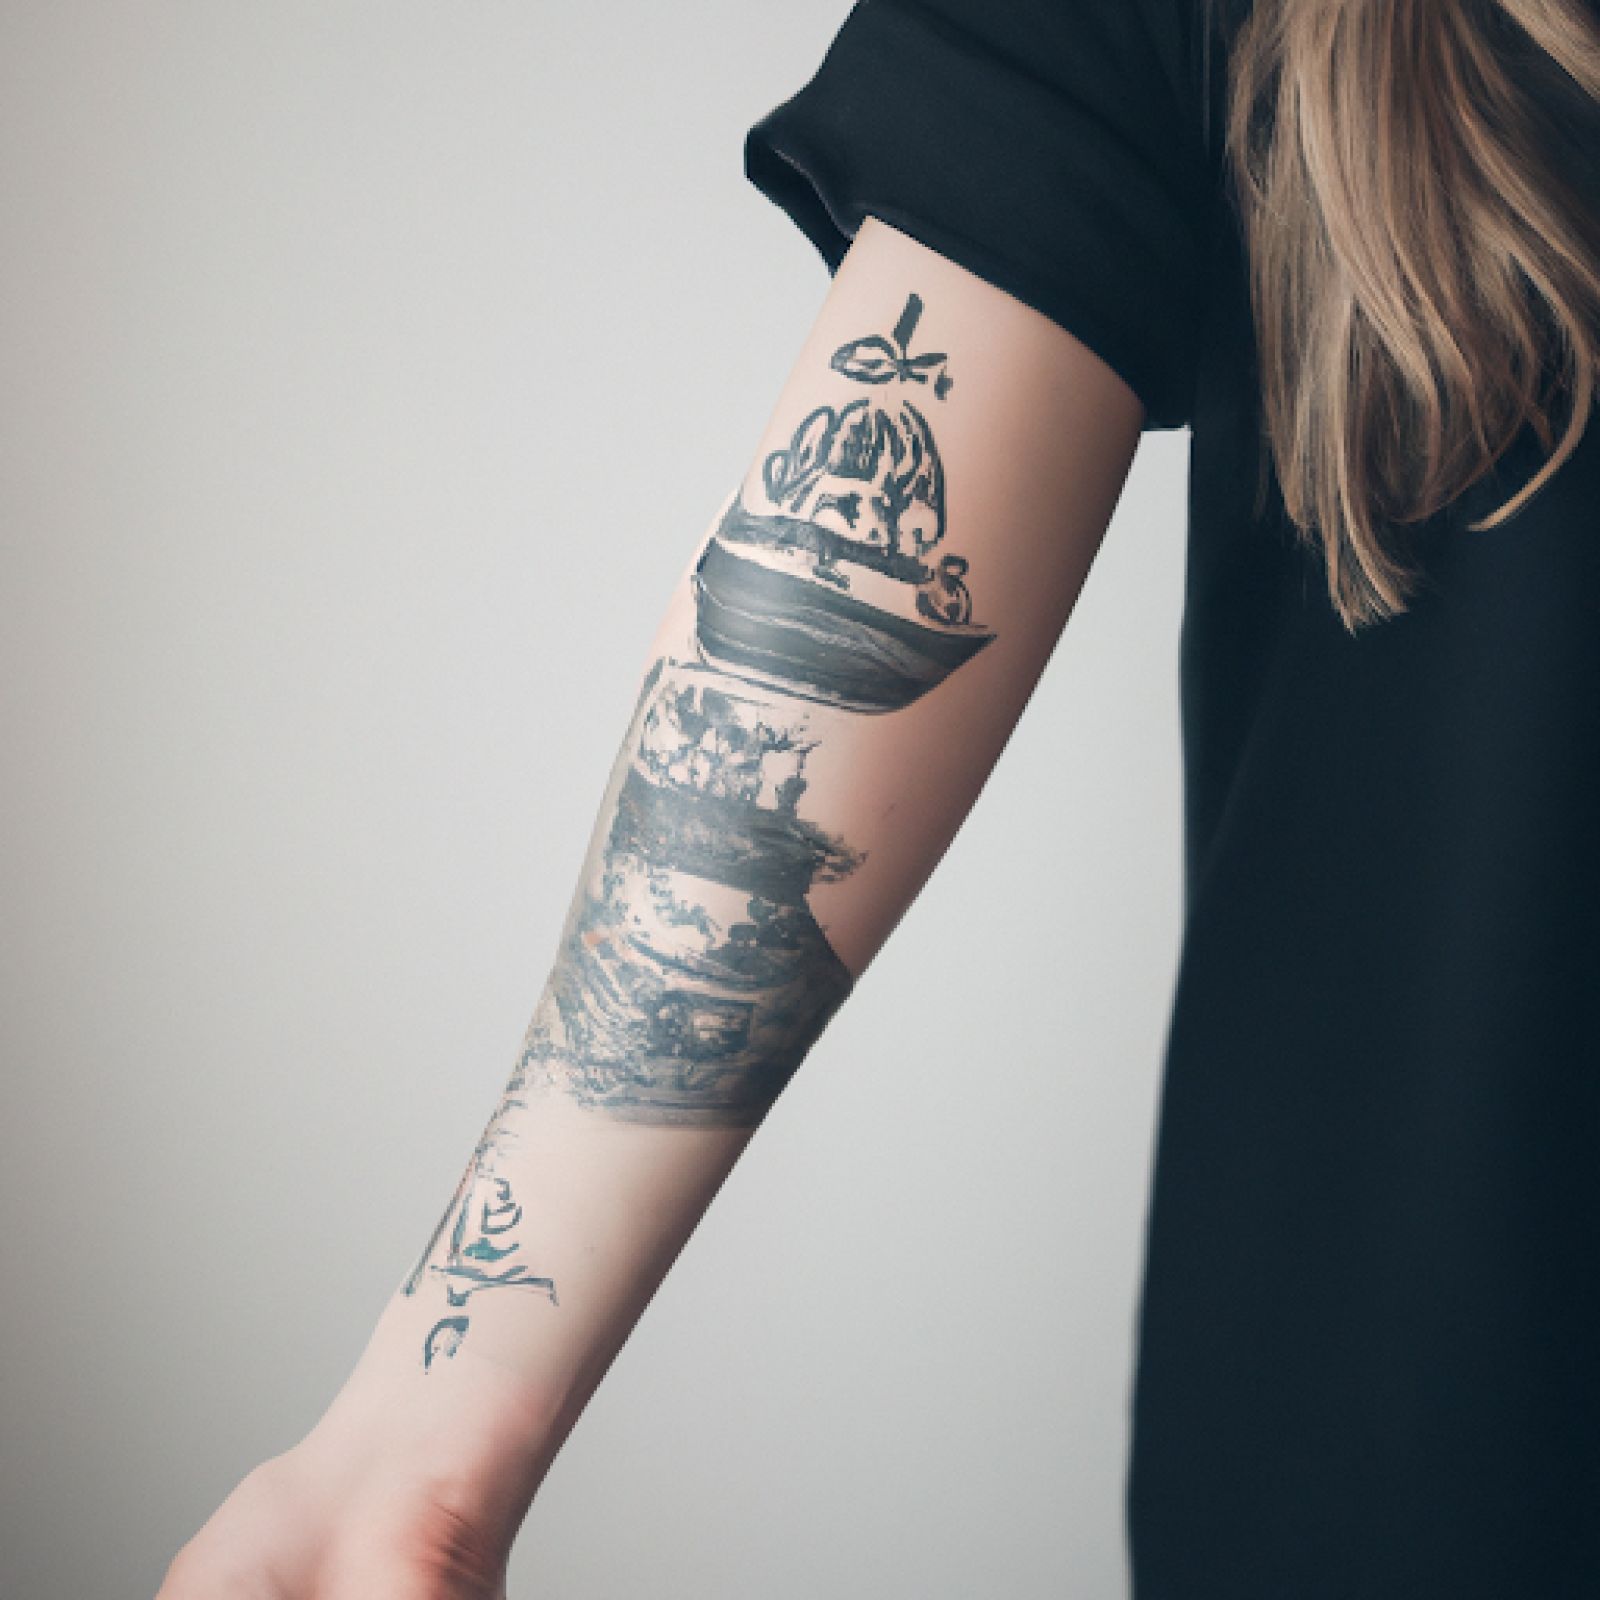 Ship tattoo on sleeve for women